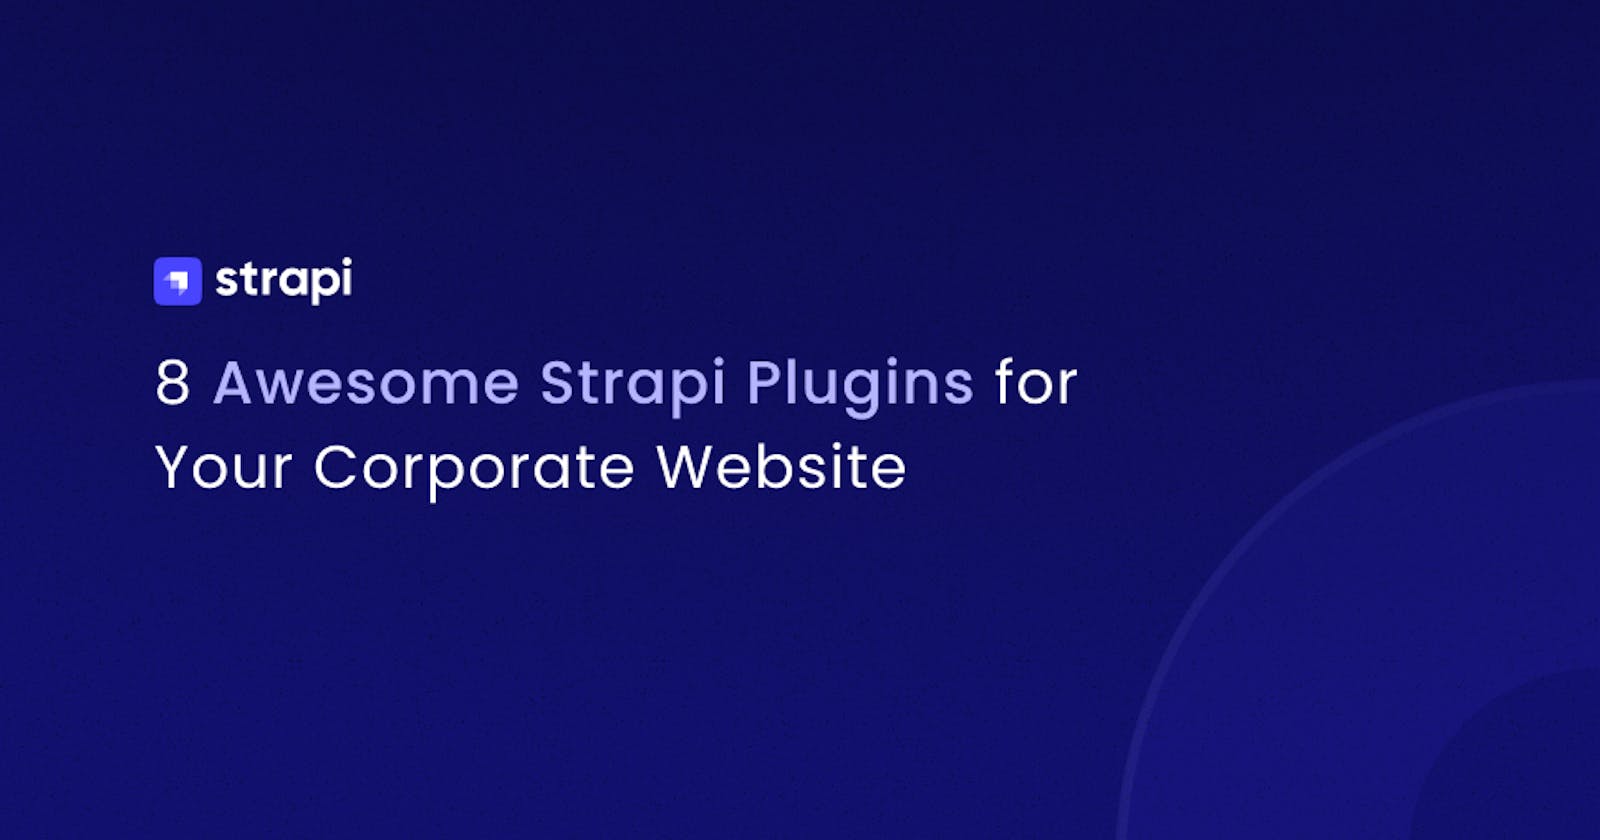 8 Awesome Strapi Plugins for Your Corporate Website